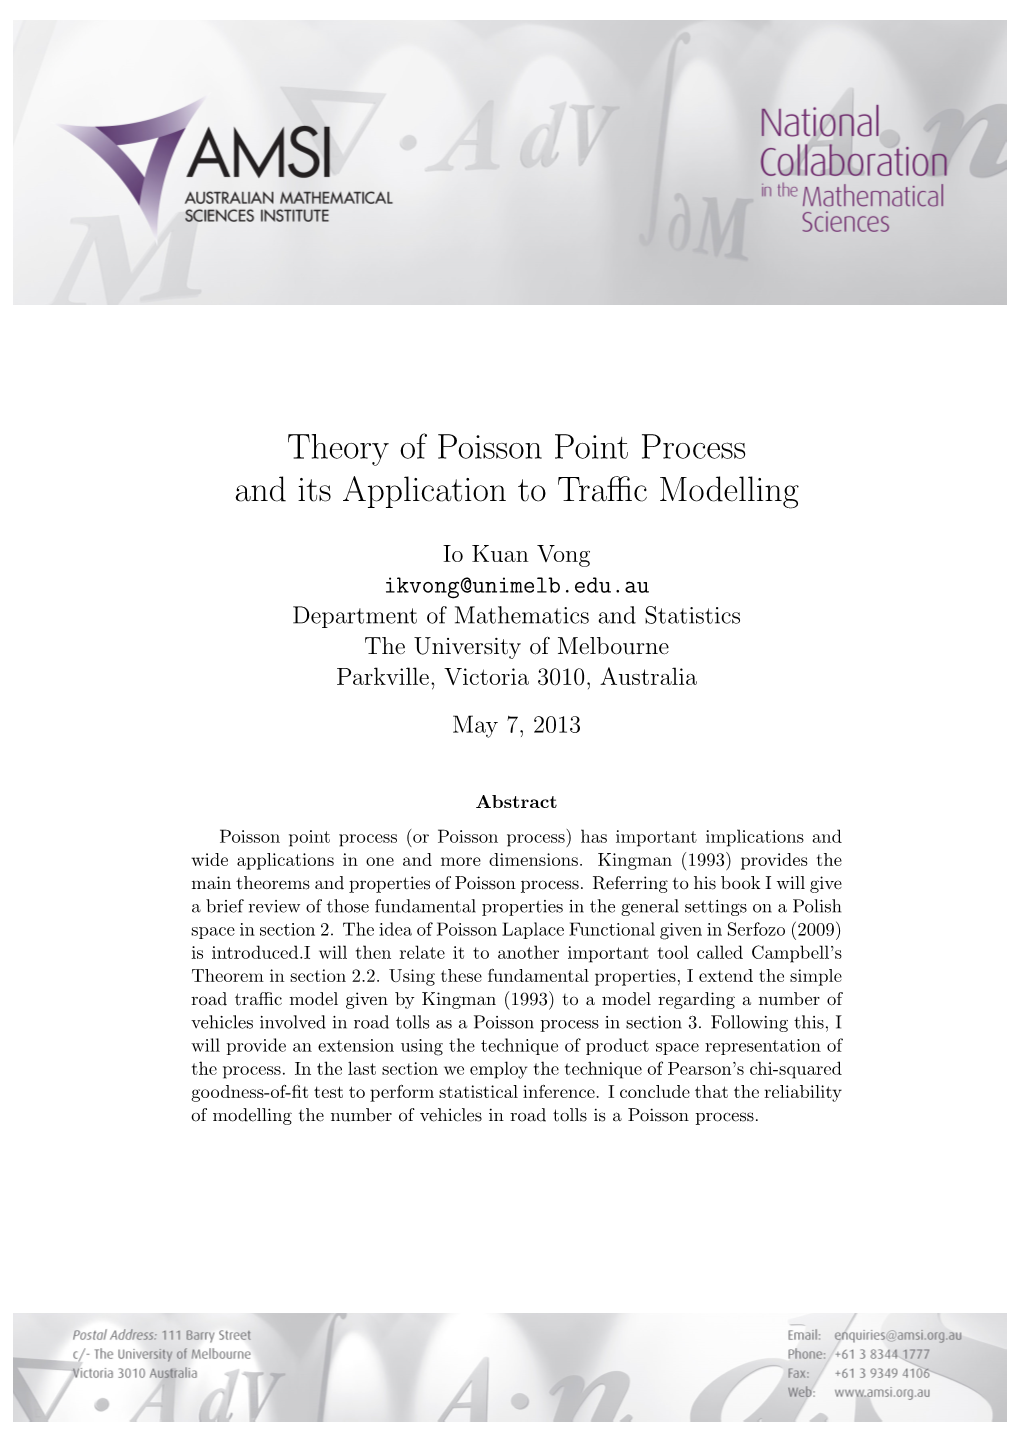 Theory of Poisson Point Process and Its Application to Traffic Modelling